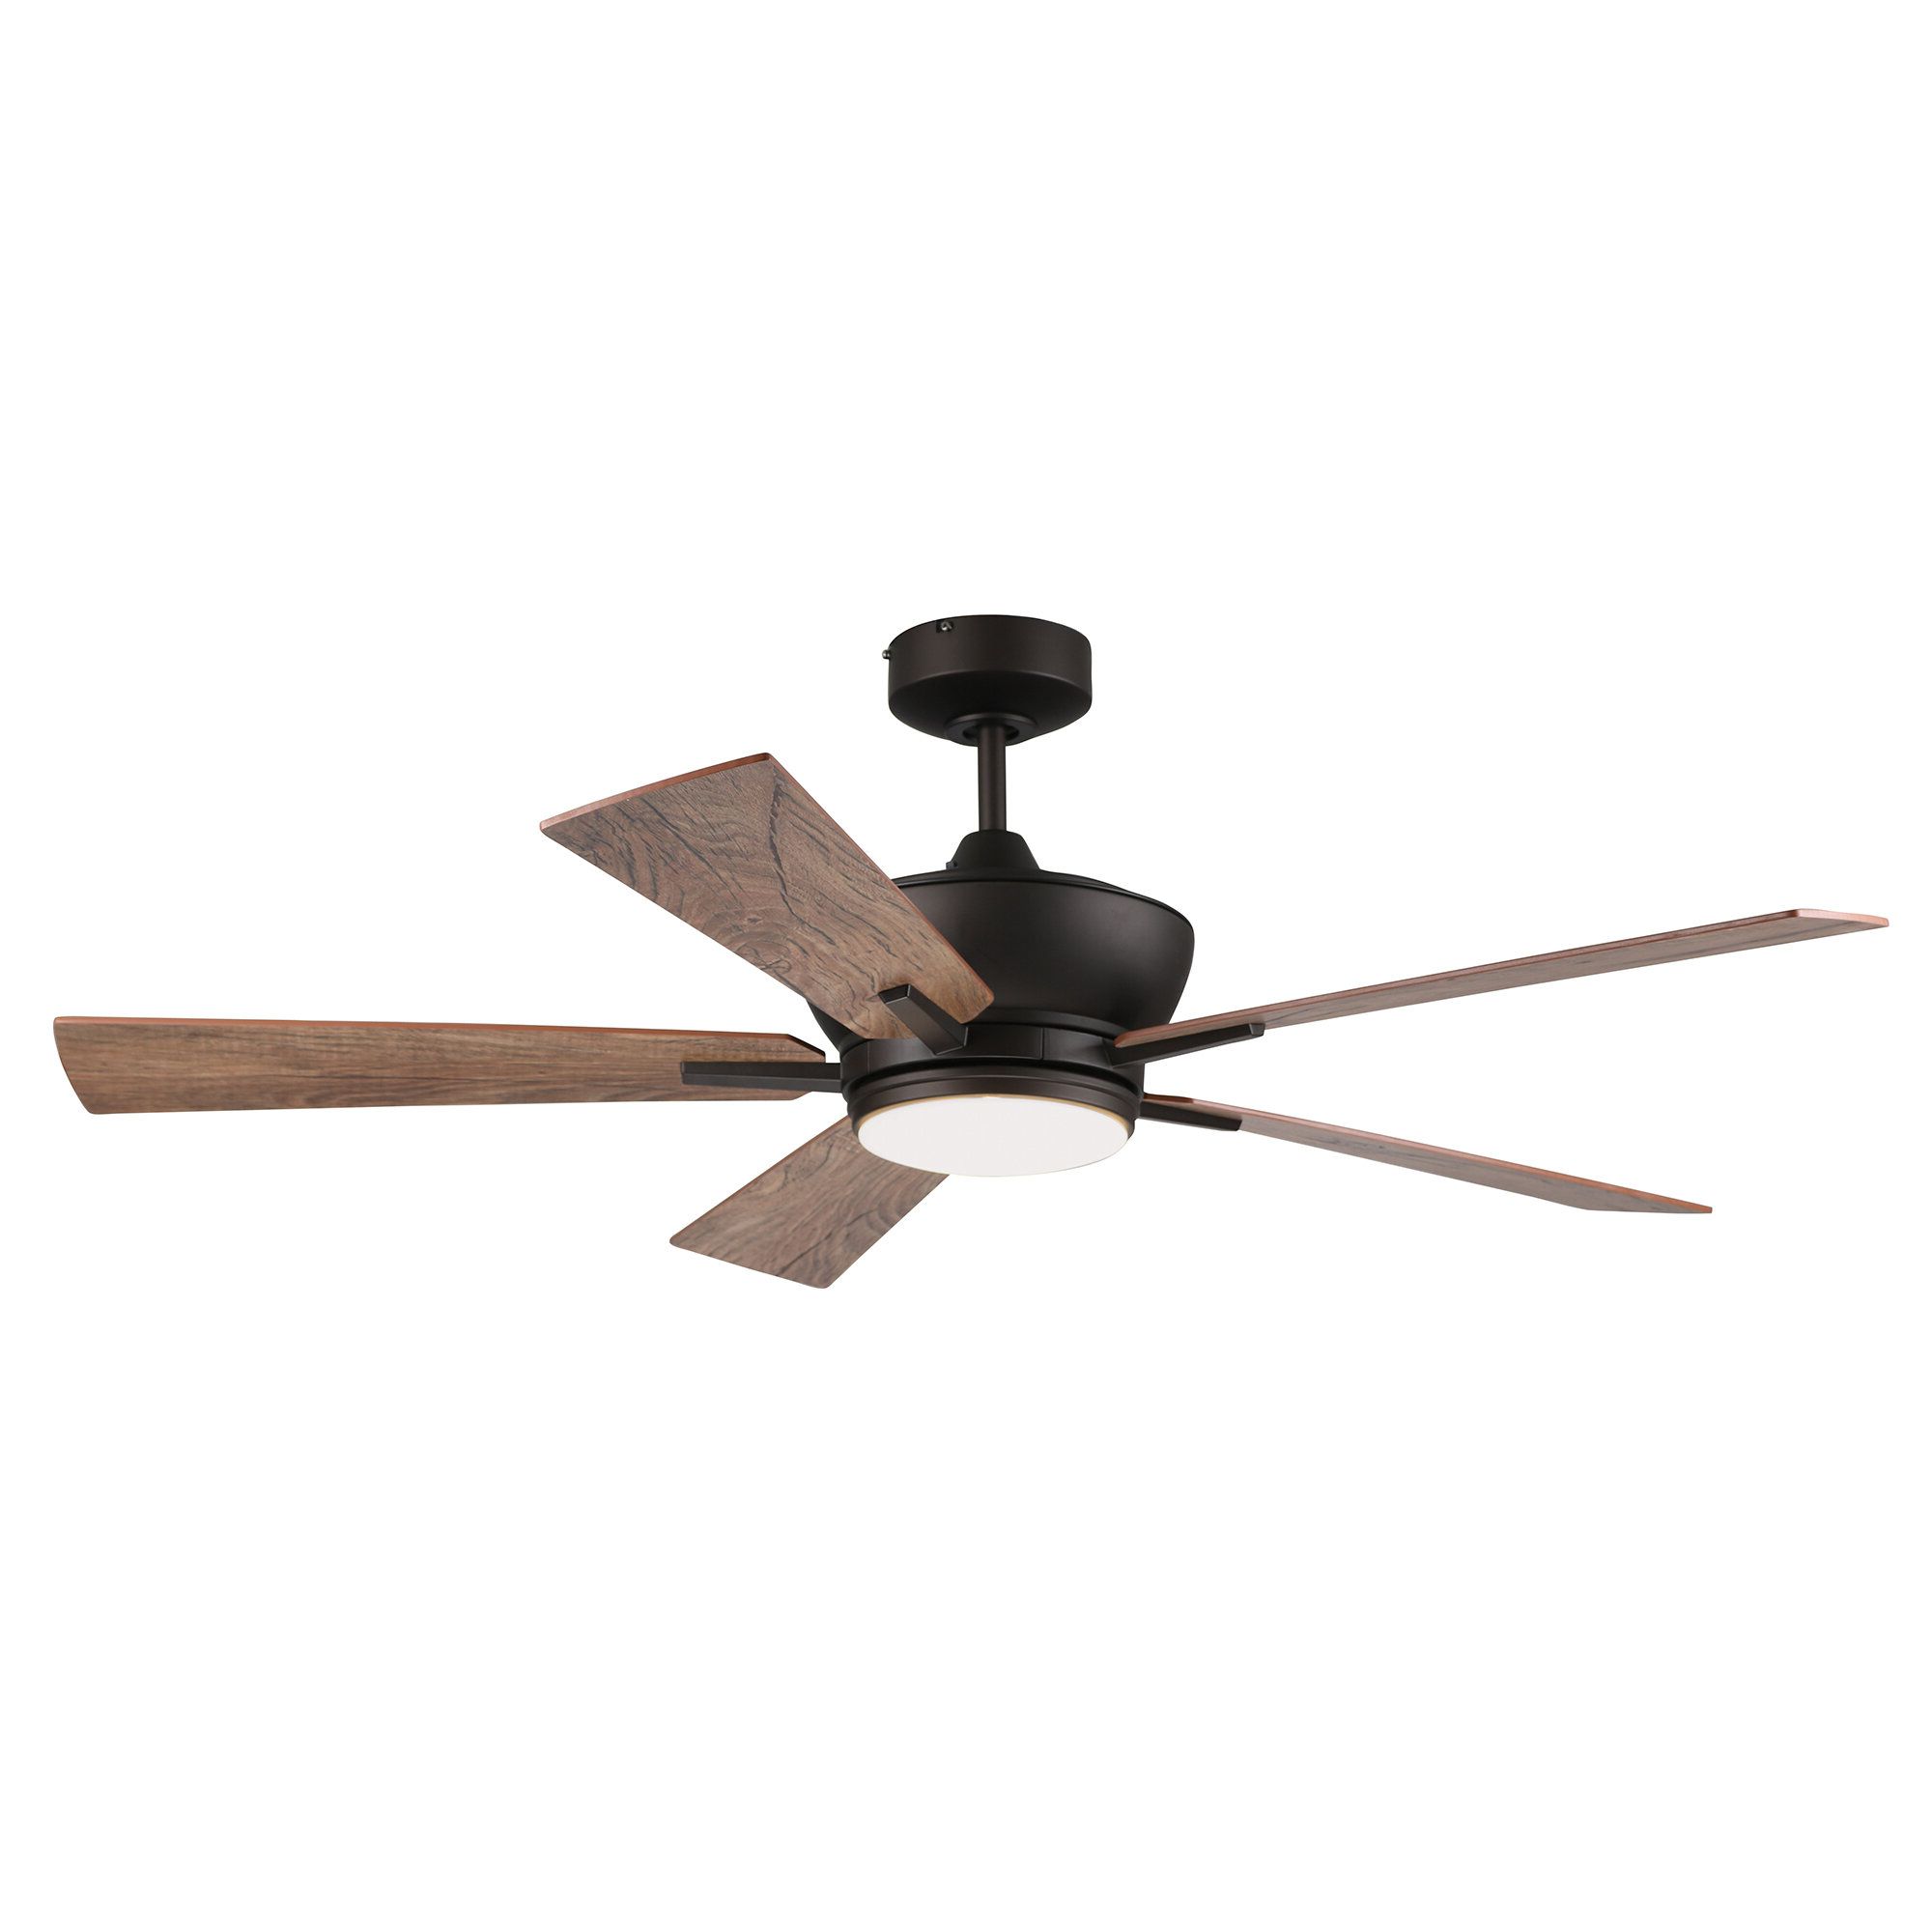 Foundry Select 52" Georgetown Tri Mount 5 Blade Ceiling Fan With Remote,  Light Kit Included Intended For Famous Lazlo 3 Blade Ceiling Fans With Remote (View 14 of 20)